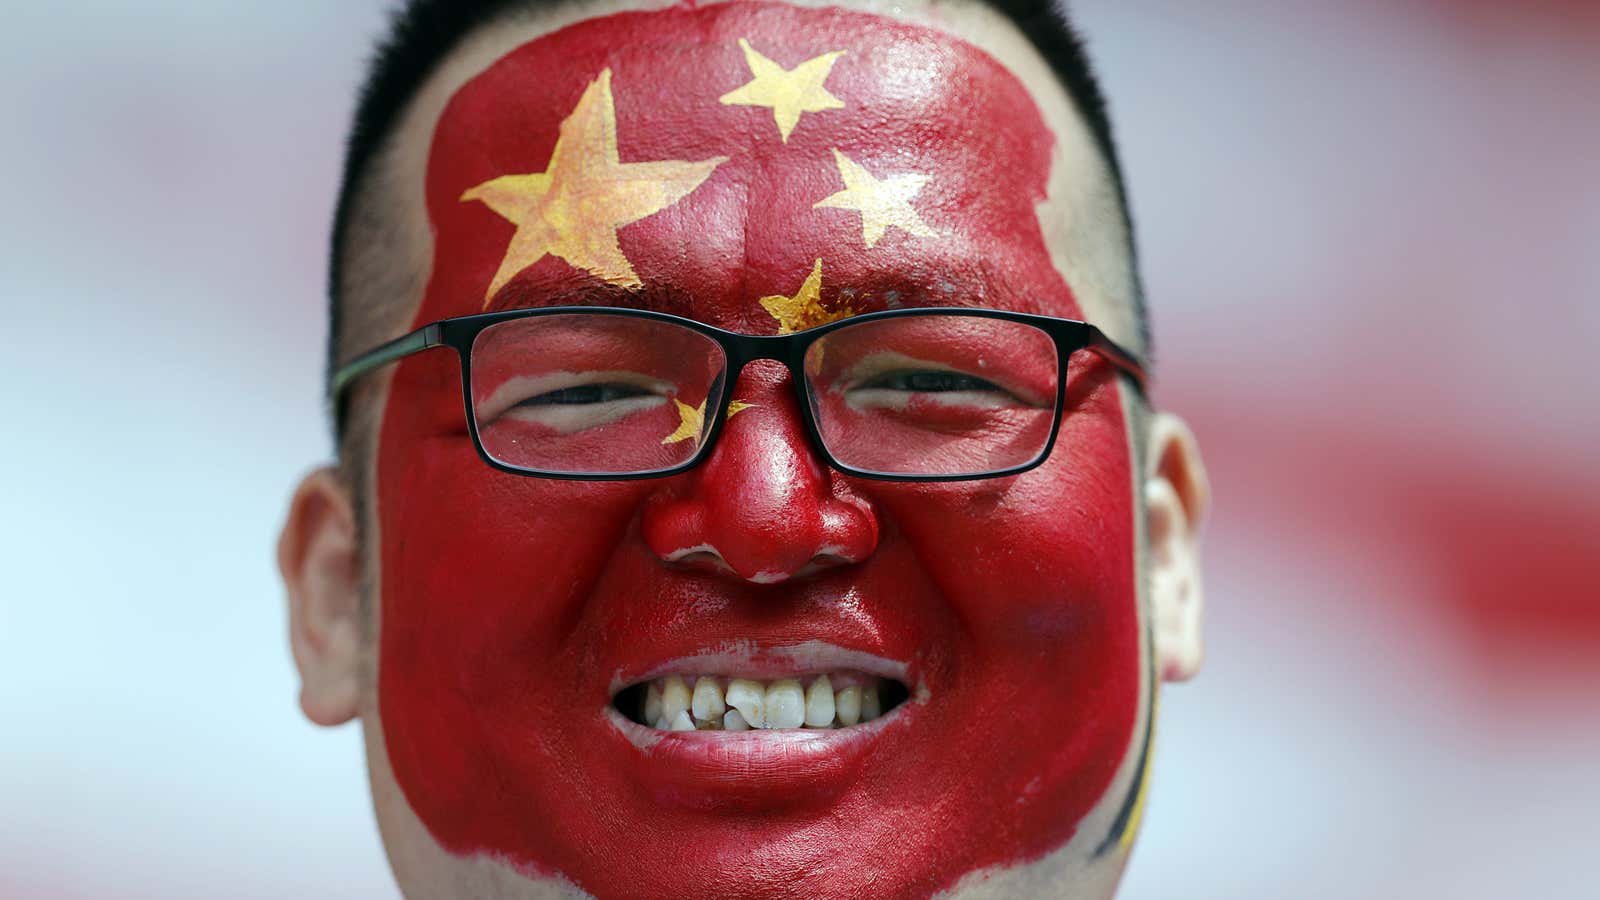 Chinese fans bought 37,000 tickets this year, according to FIFA.